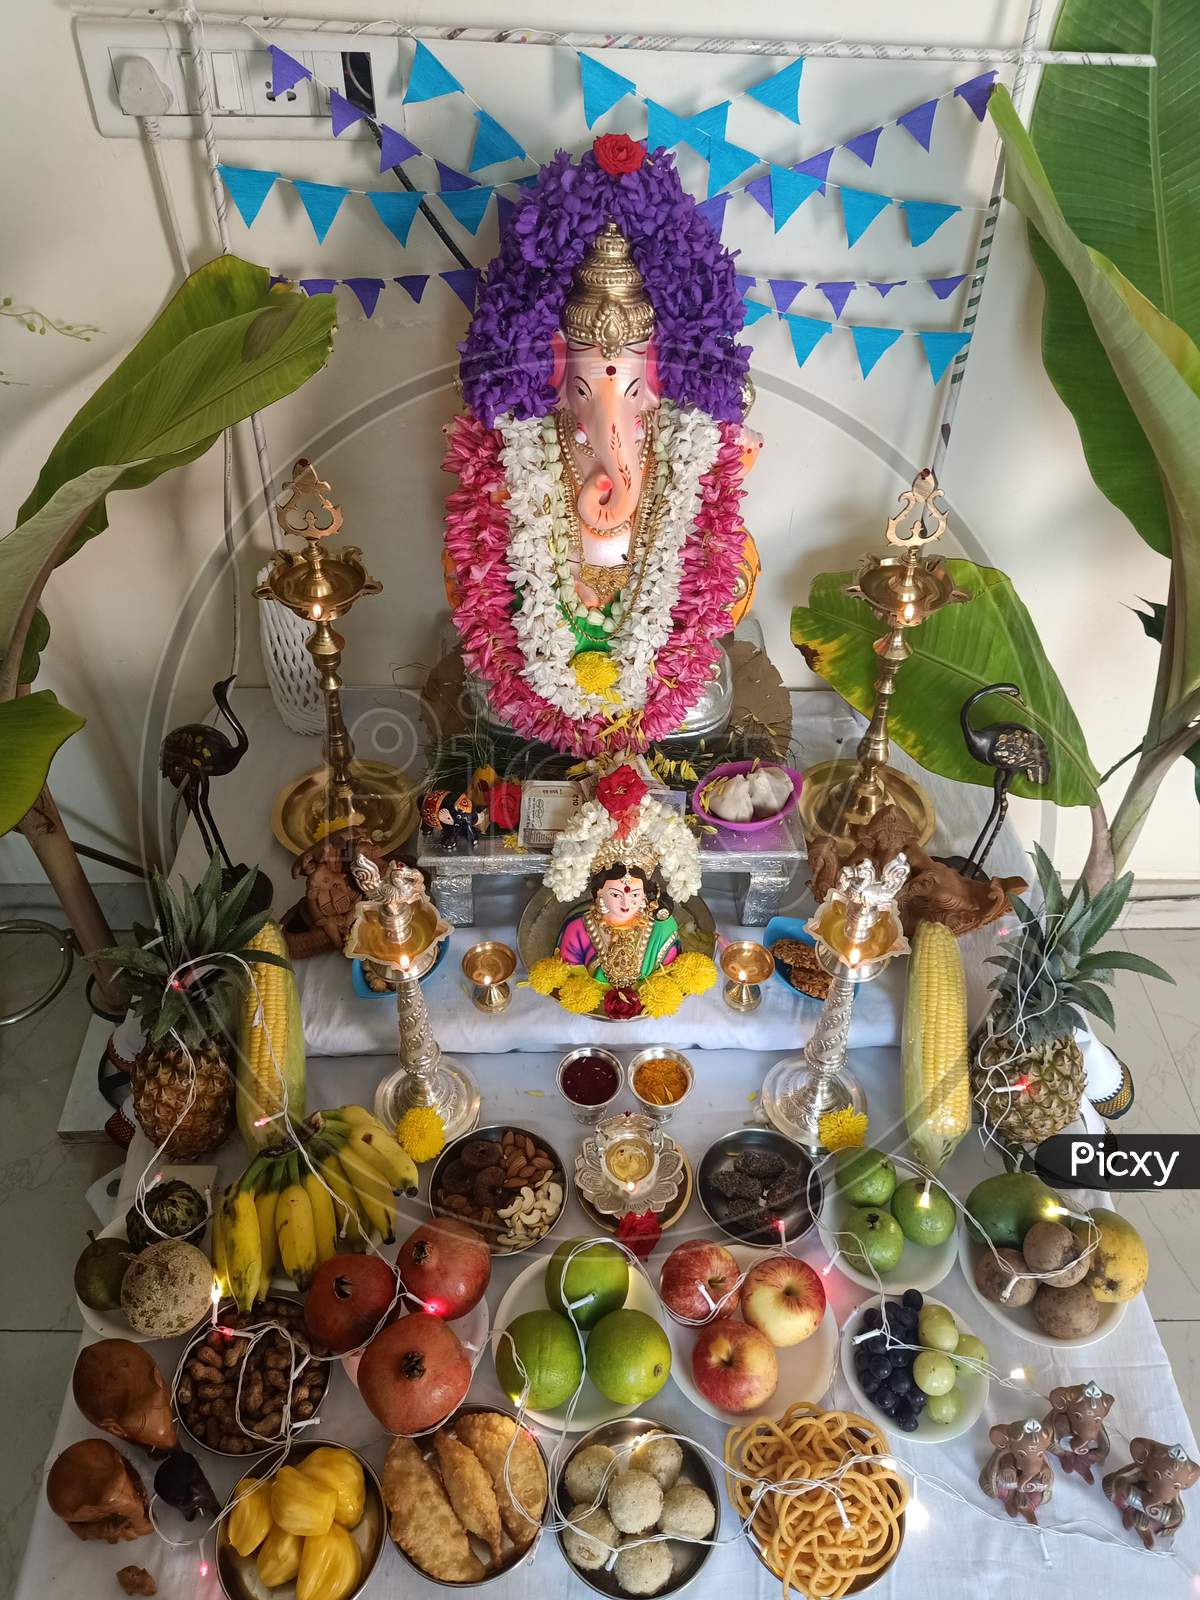 Get A Ganesh Chaturthi Decoration At Home In Your City | forum.iktva.sa